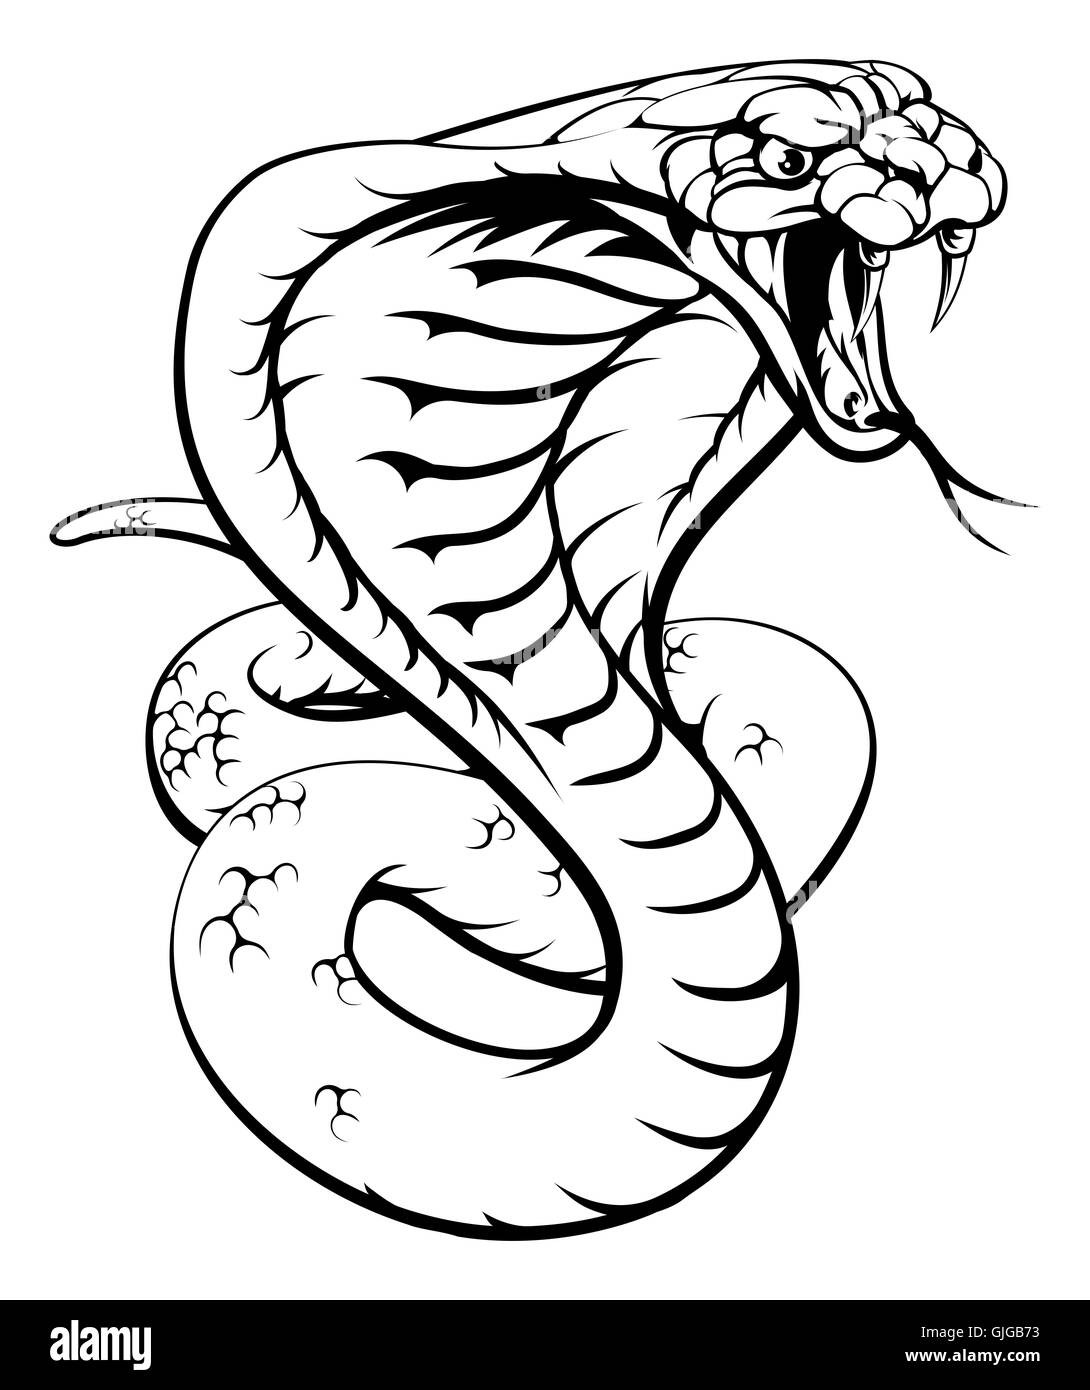 An illustration of a king cobra snake in black and white Stock Photo